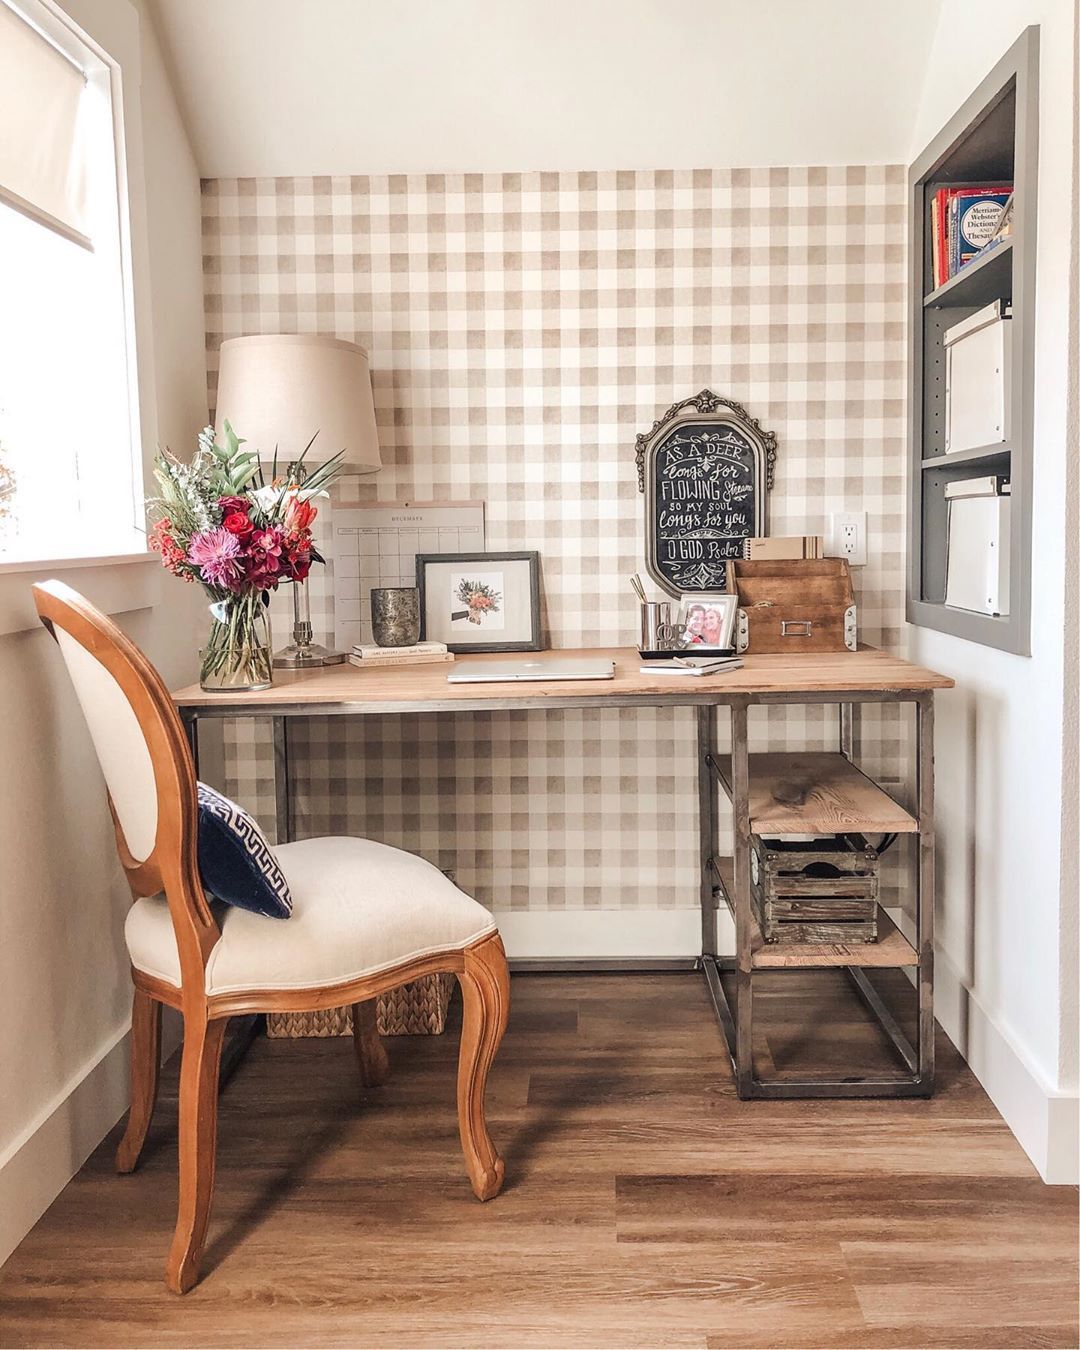 French Country Office with Round-back Louis Chair via @beingbrynnscott